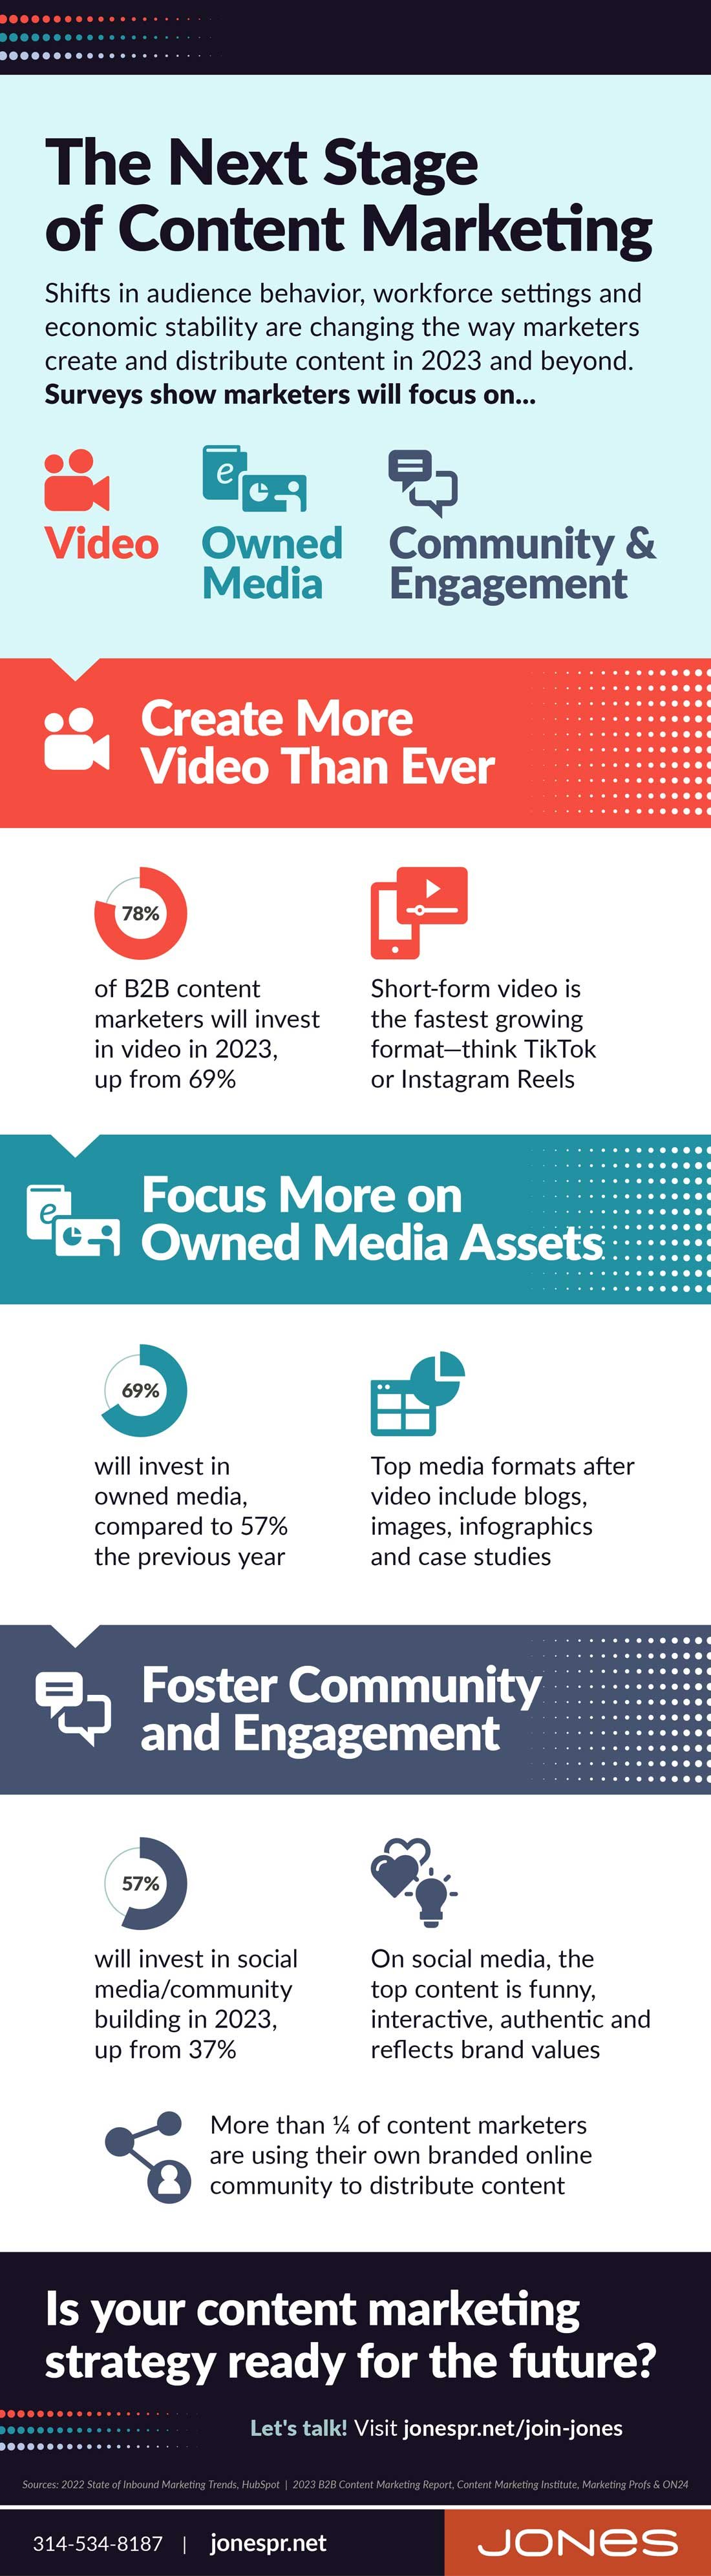 What’s Next for Content Marketing - Infographic